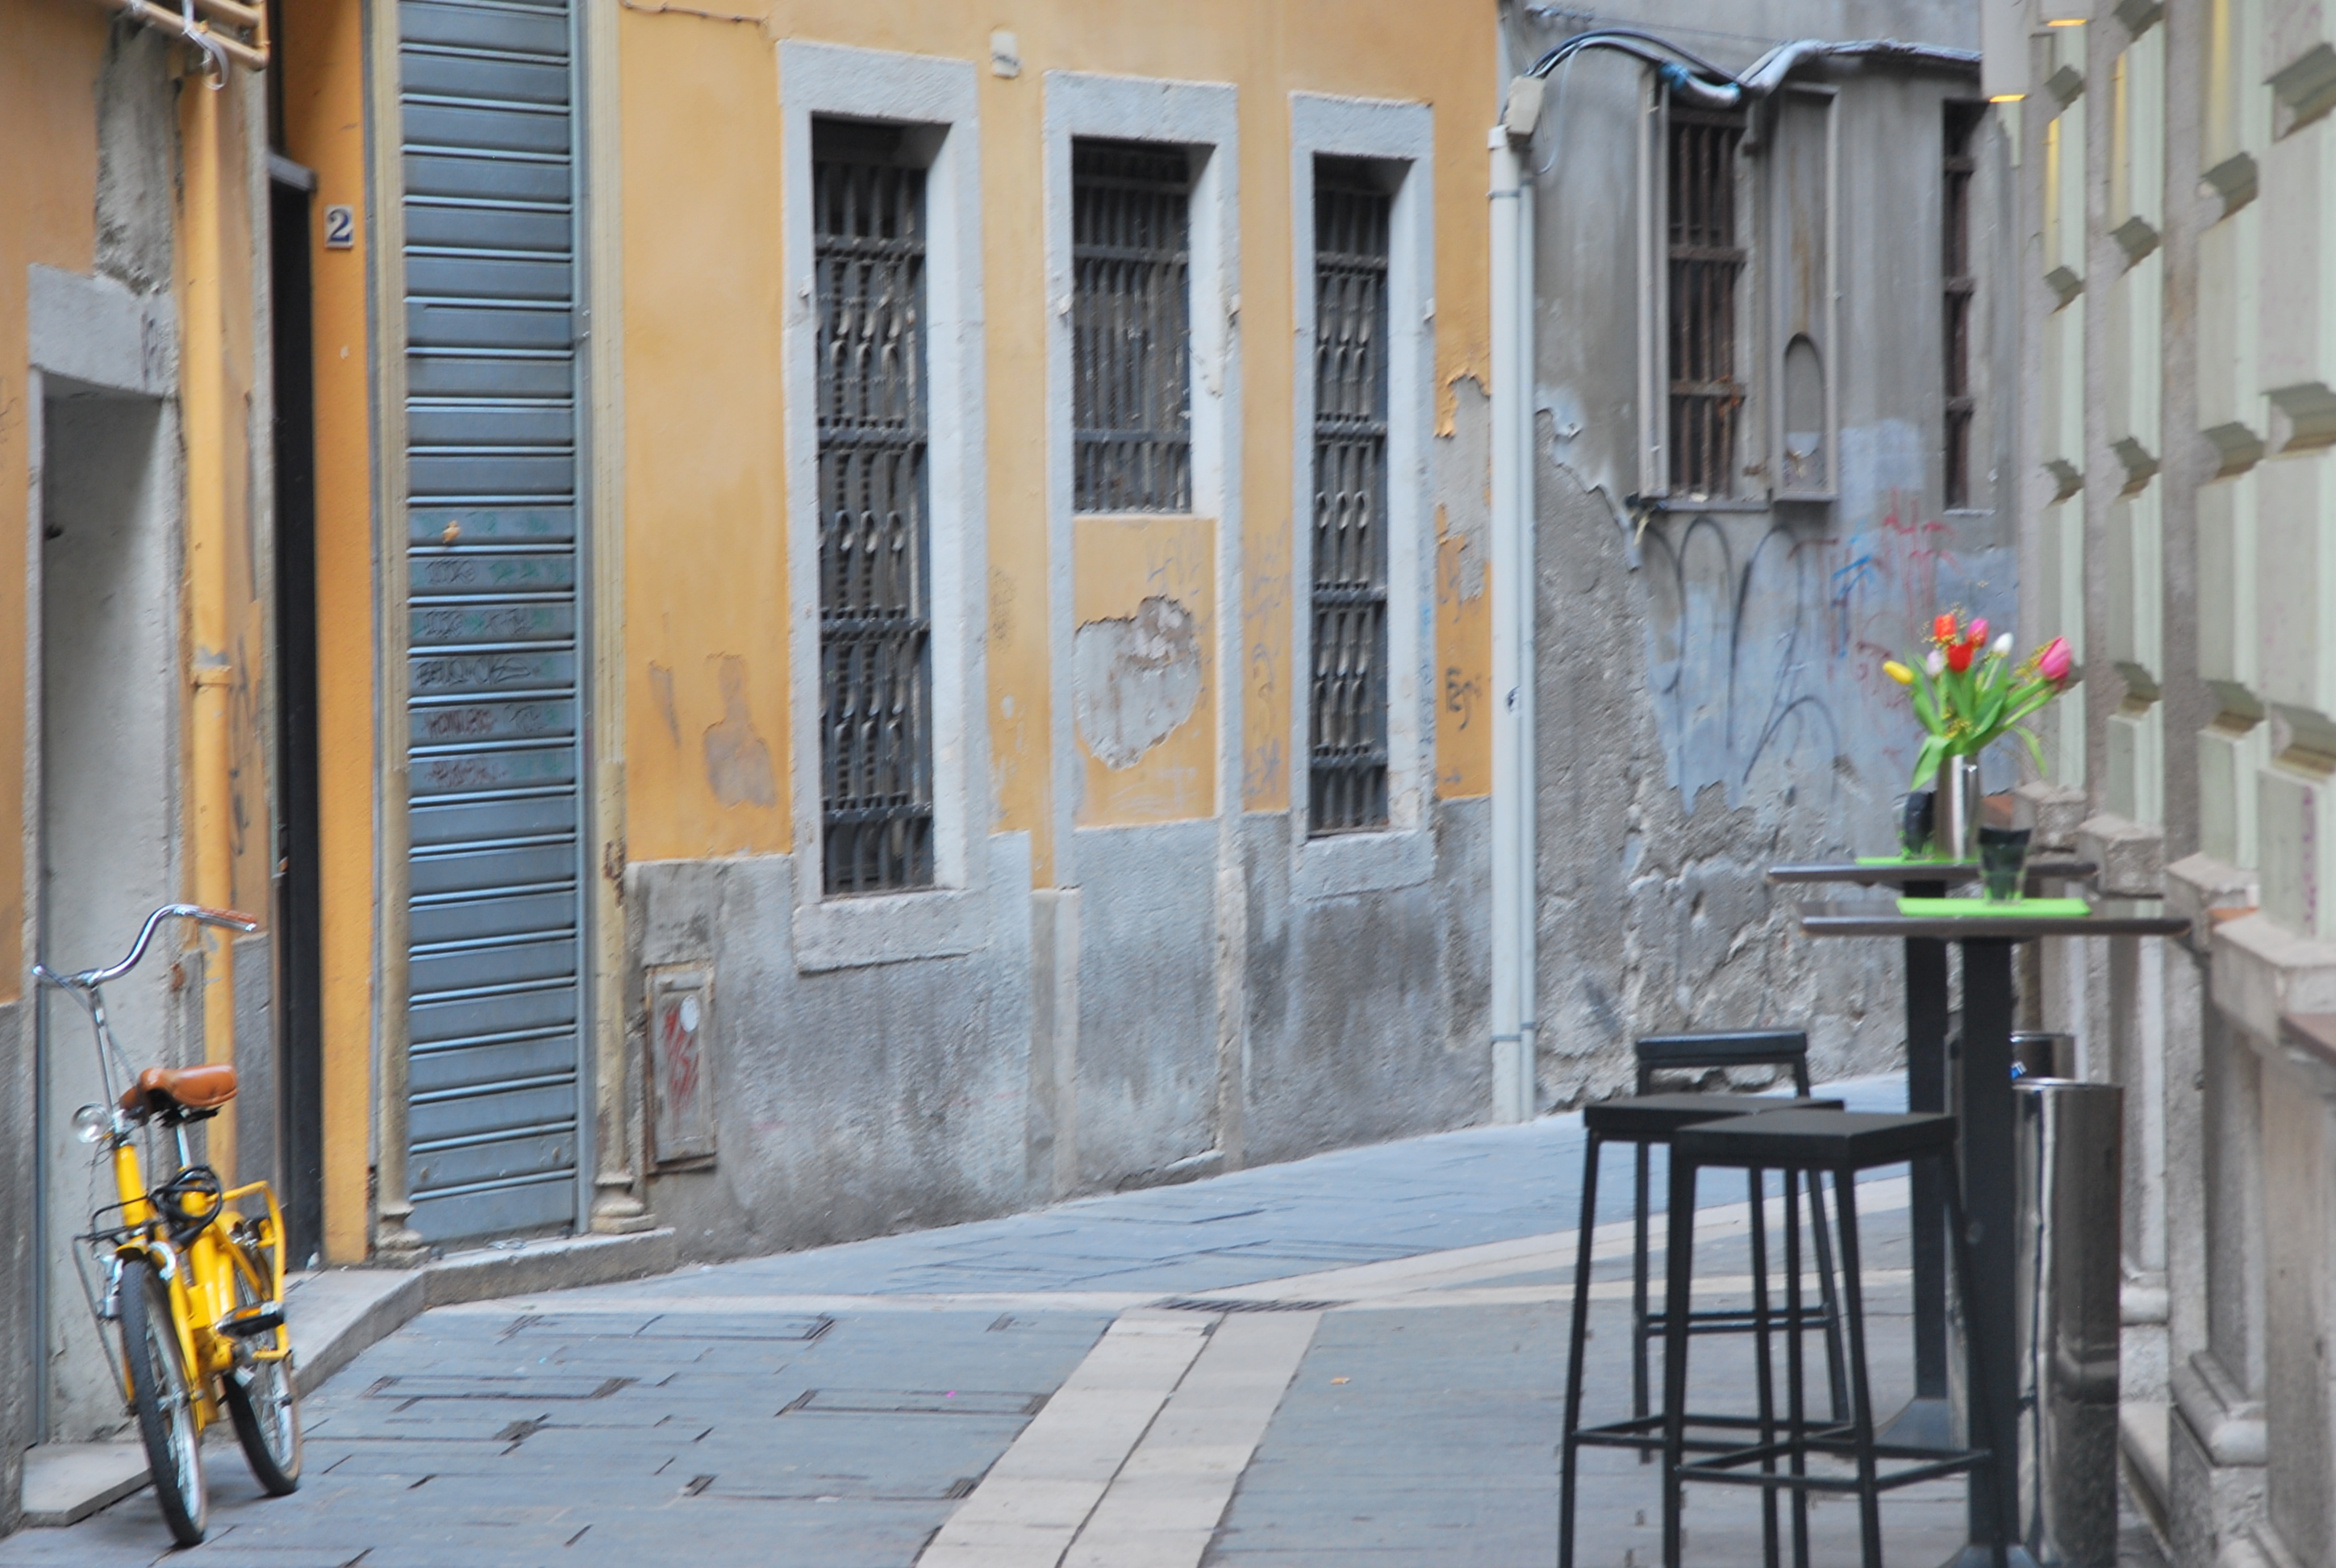 Wallpaper, window, city, street, Italy, bicycle, building, wall, road, table, house, yellow, town, door, Trieste, alley, home, apartment, sidewalk, facade, porch, neighbourhood, real estate, stools 2896x1944